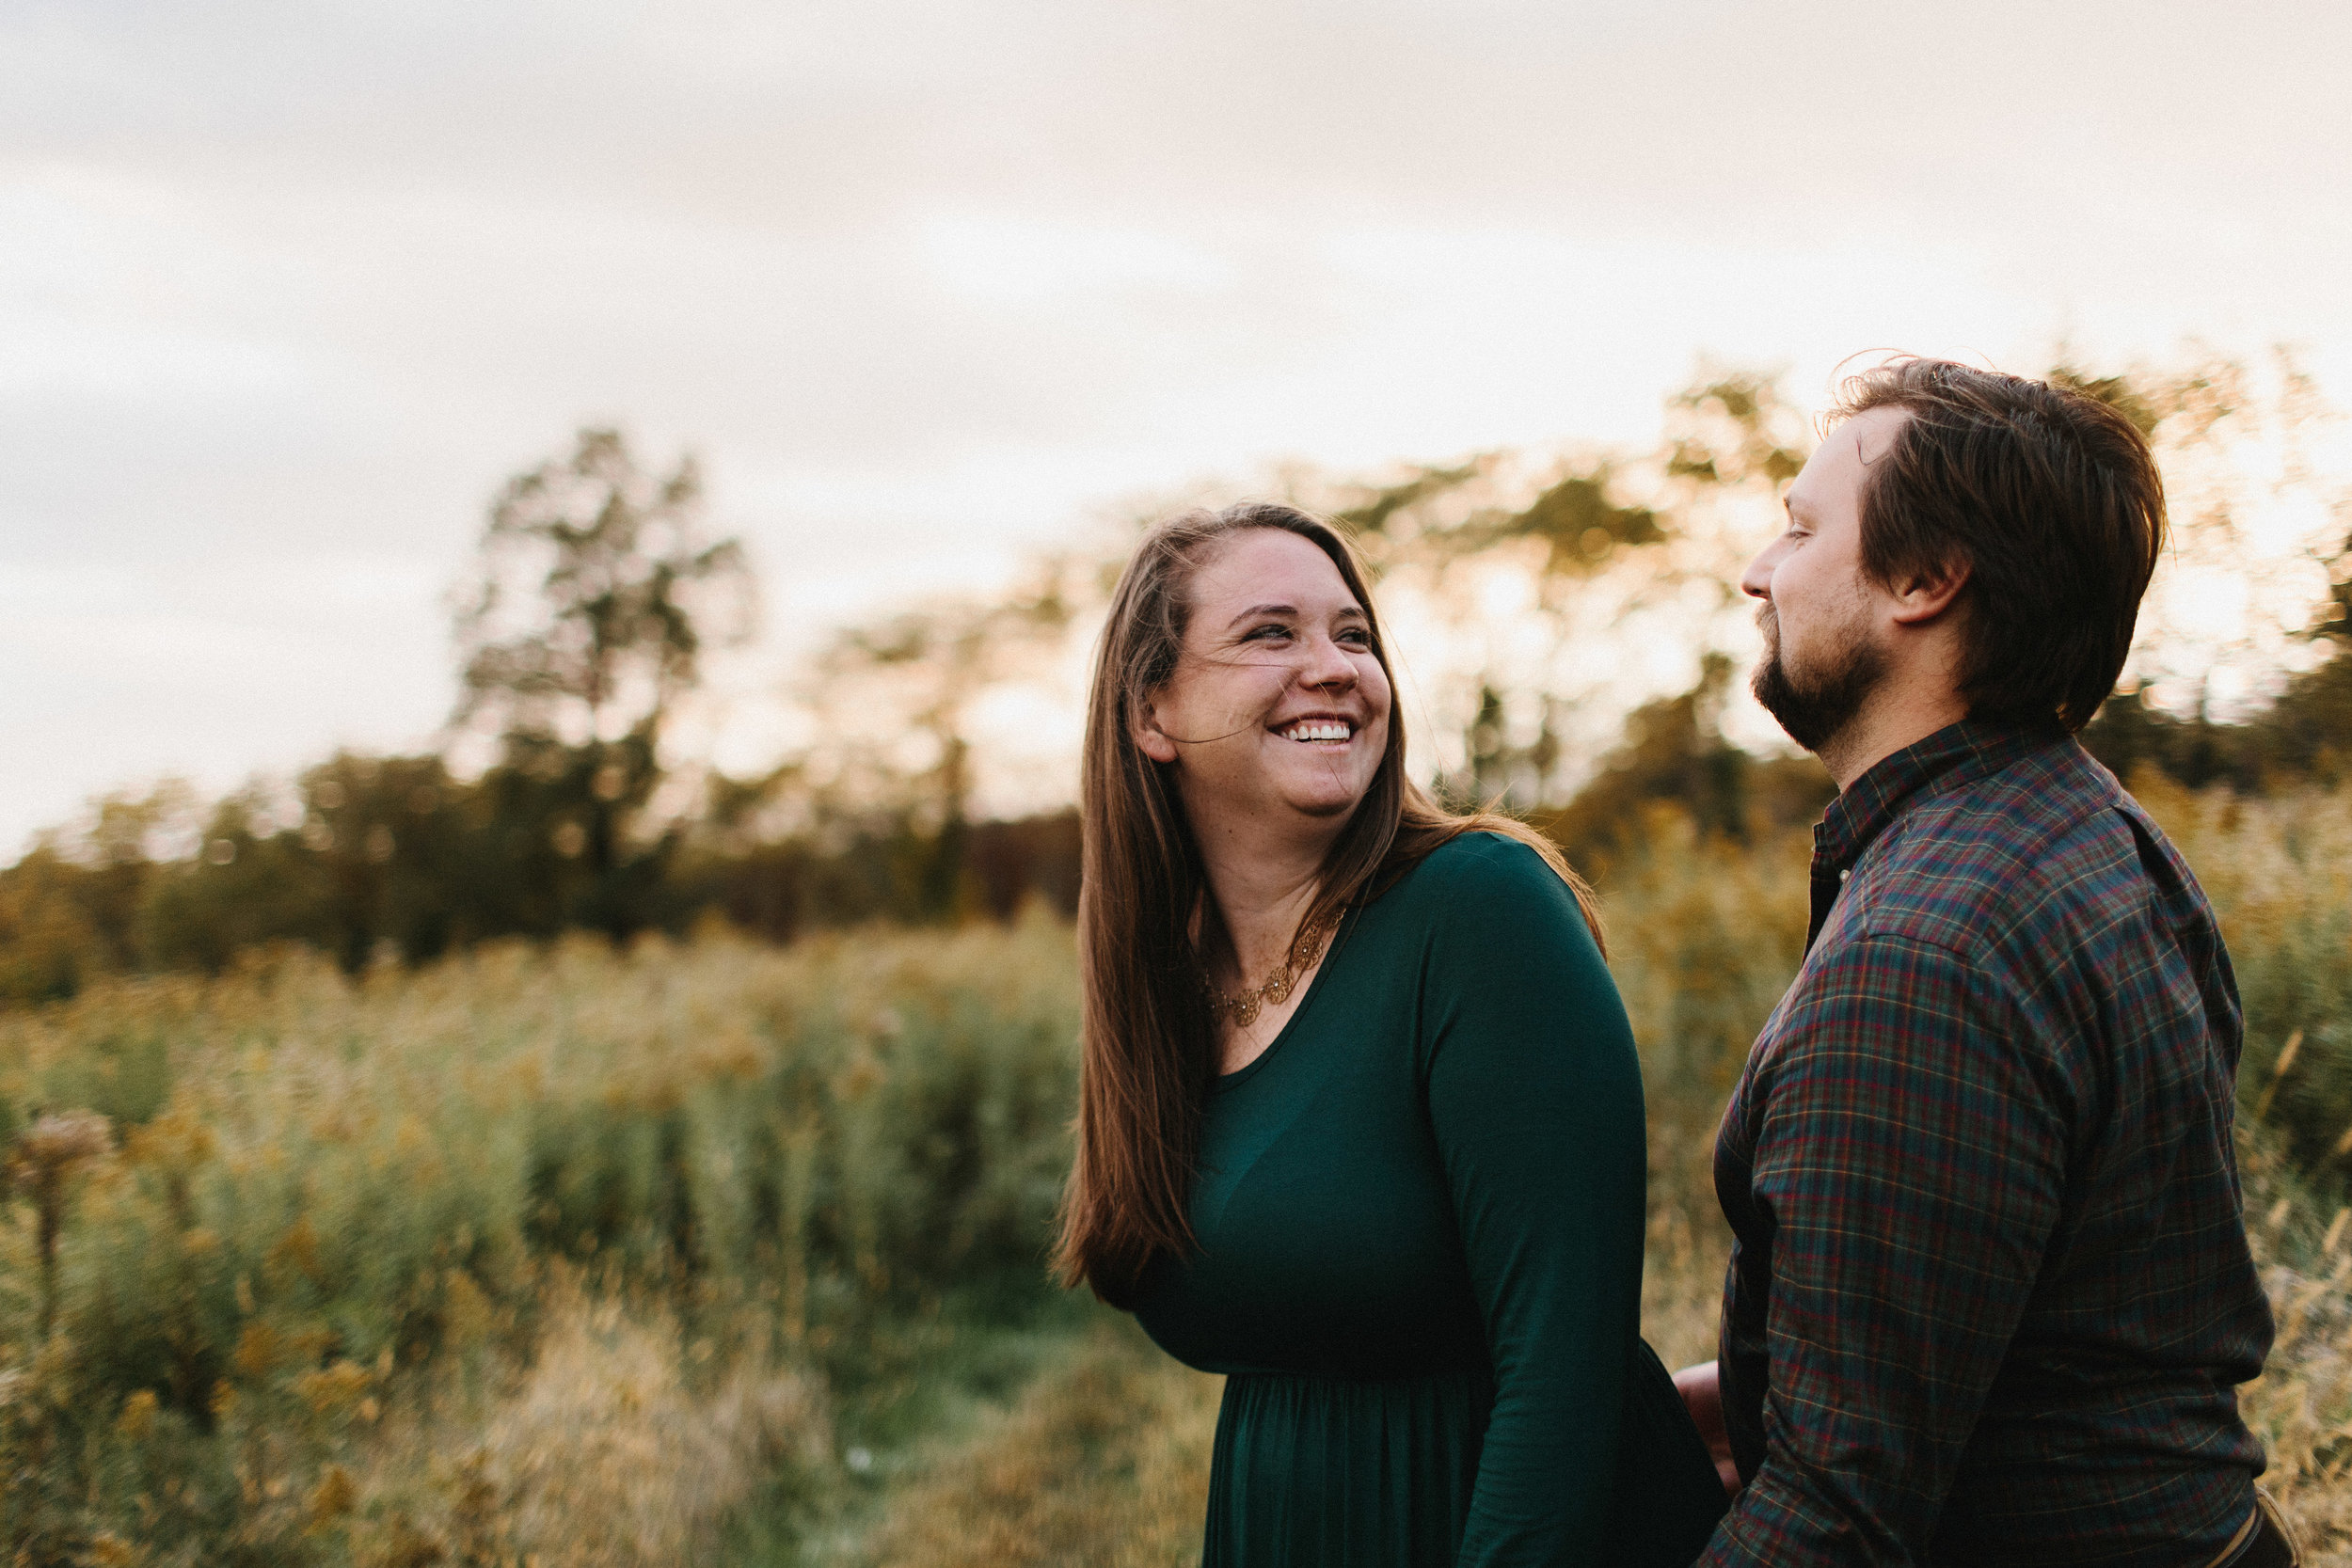 iowa_city_engagement_adventure_prairie_graduate_at_home_dog_couples_downtown_wilsons_orchard_1217.jpg